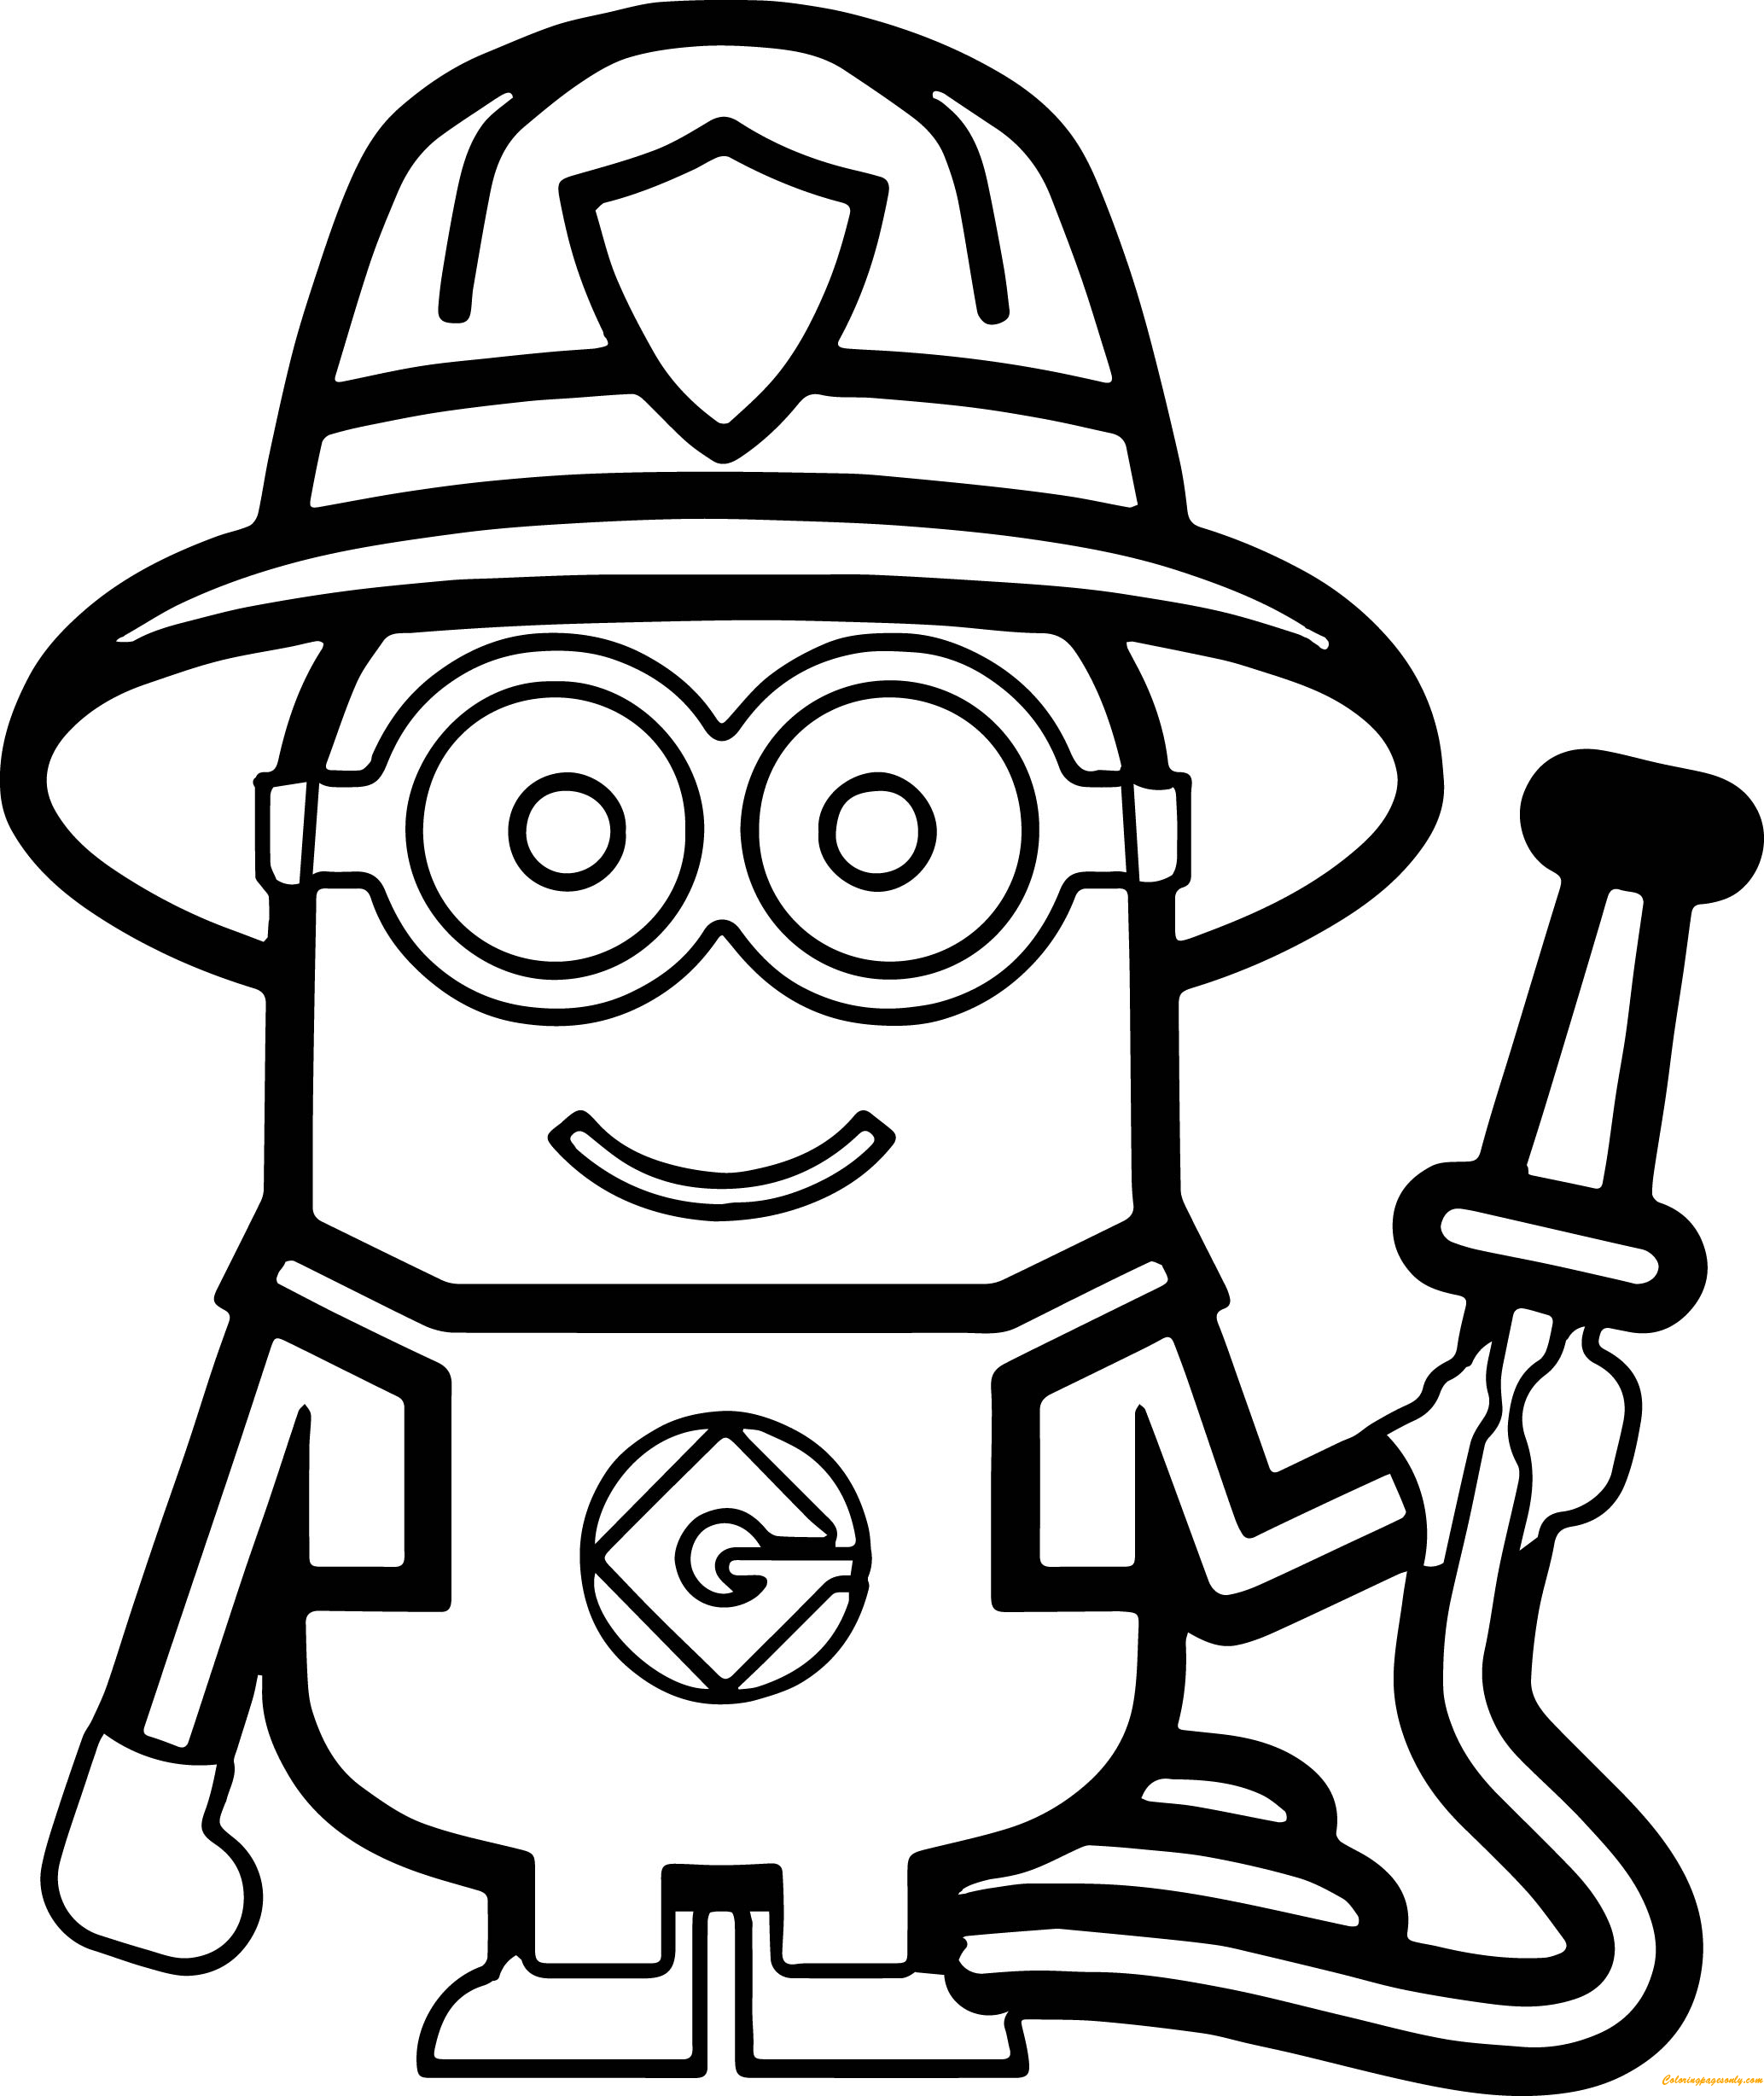 firefighter-badge-coloring-pages-coloring-home